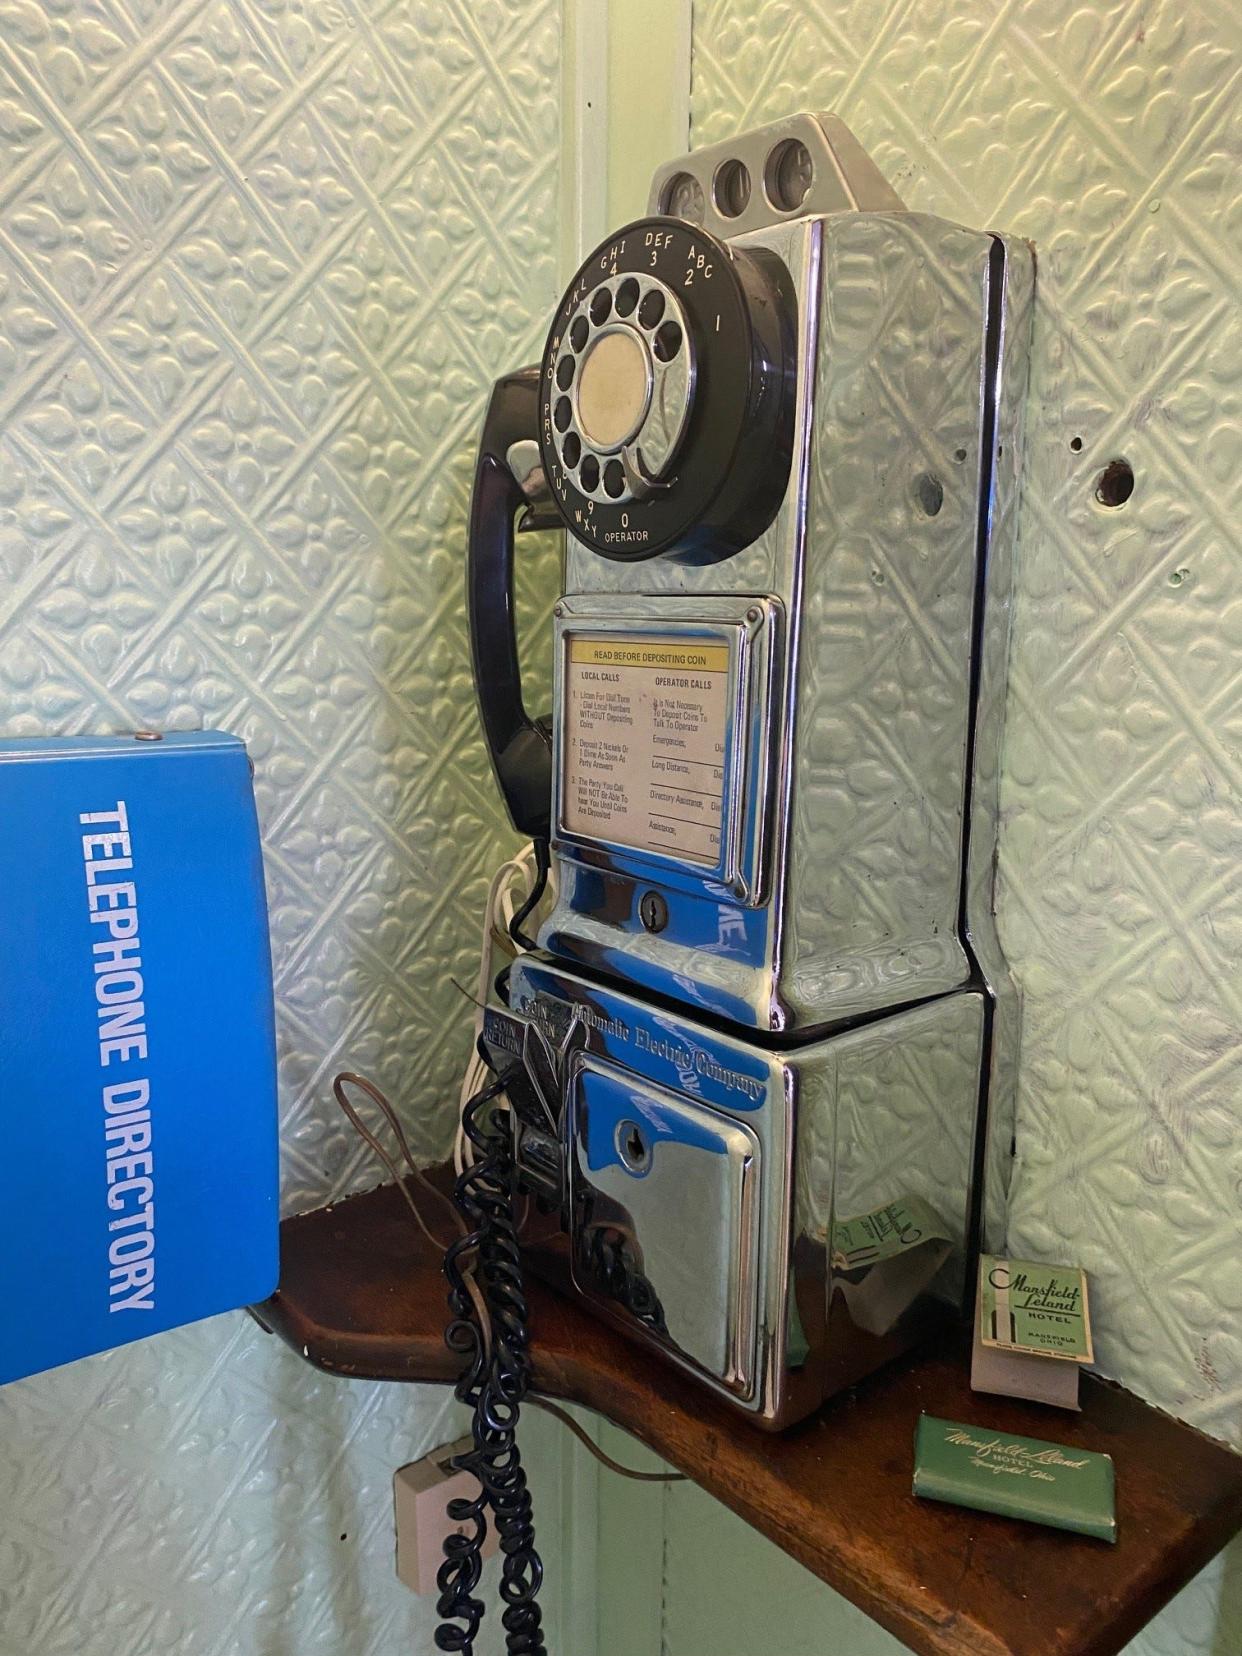 It's not often you can find a pay phone these days. This phone was in the Leland Hotel in 1976. Classic car collector Johnny Matthes now owns it and has restored the 1927 phone booth that used to be in the hotel's lobby. It is part of his mini museum on Ashland Road.